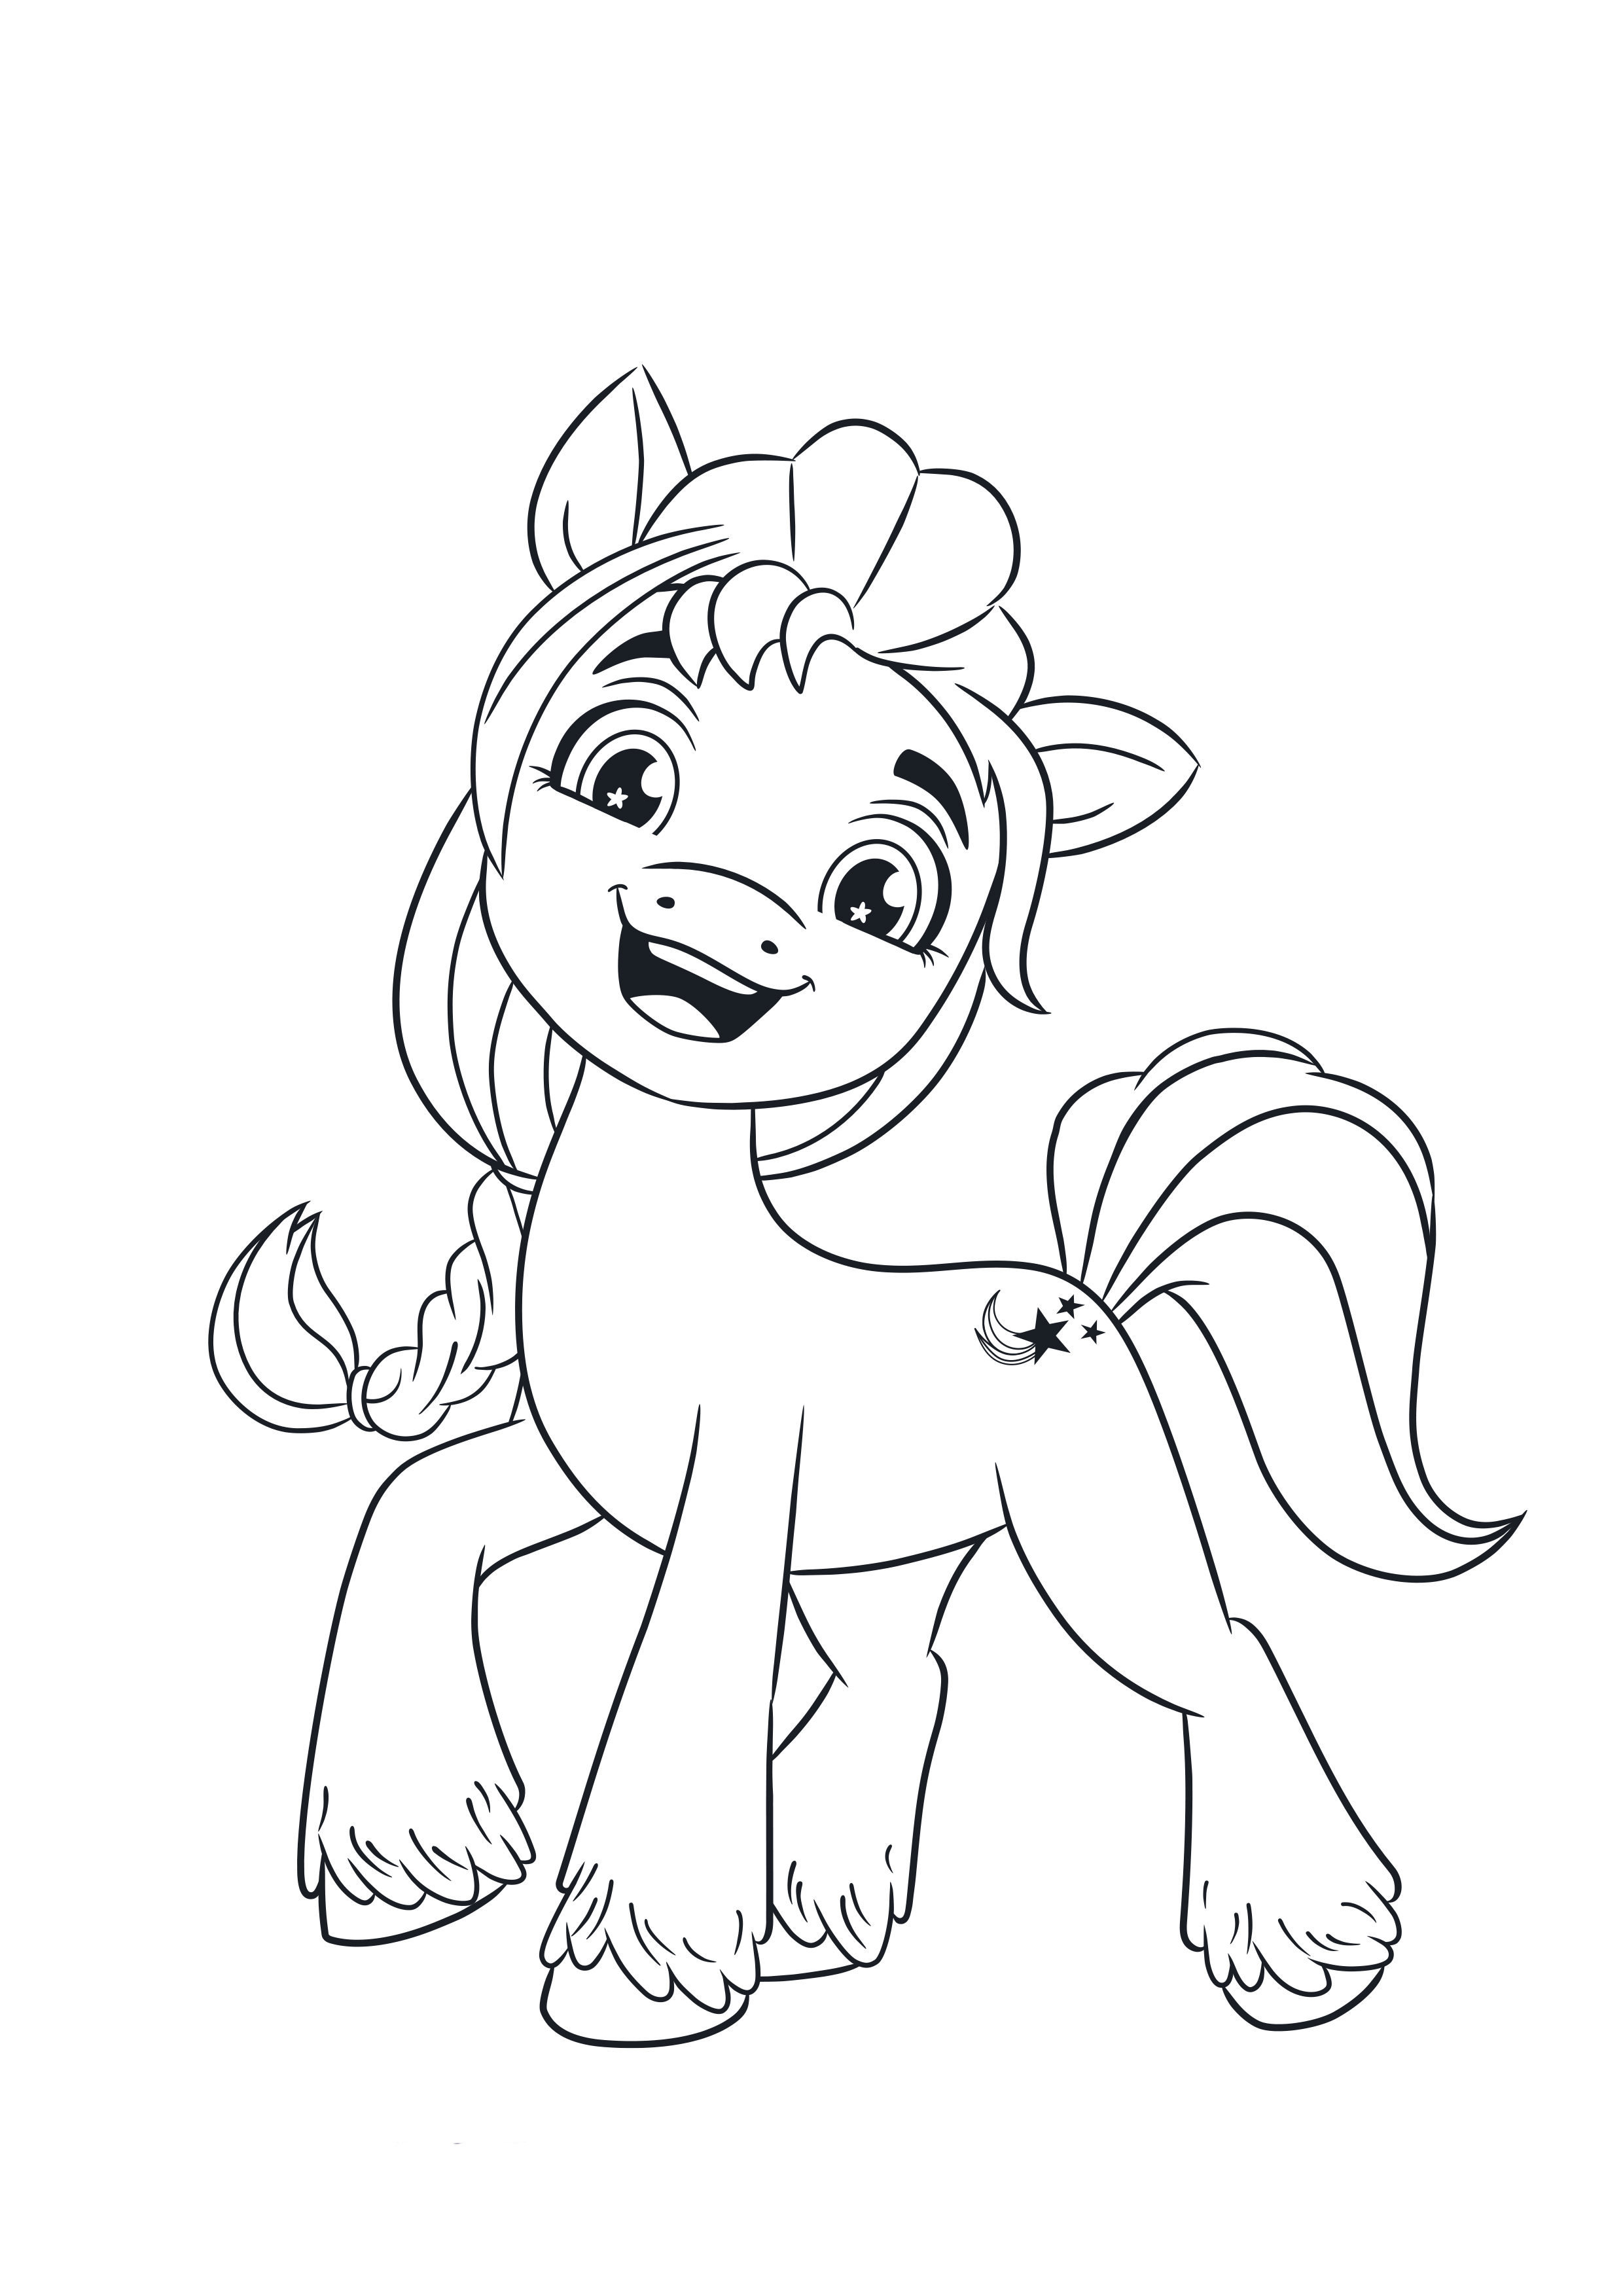 my-little-pony-a-new-generation-movie-coloring-pages-youloveit